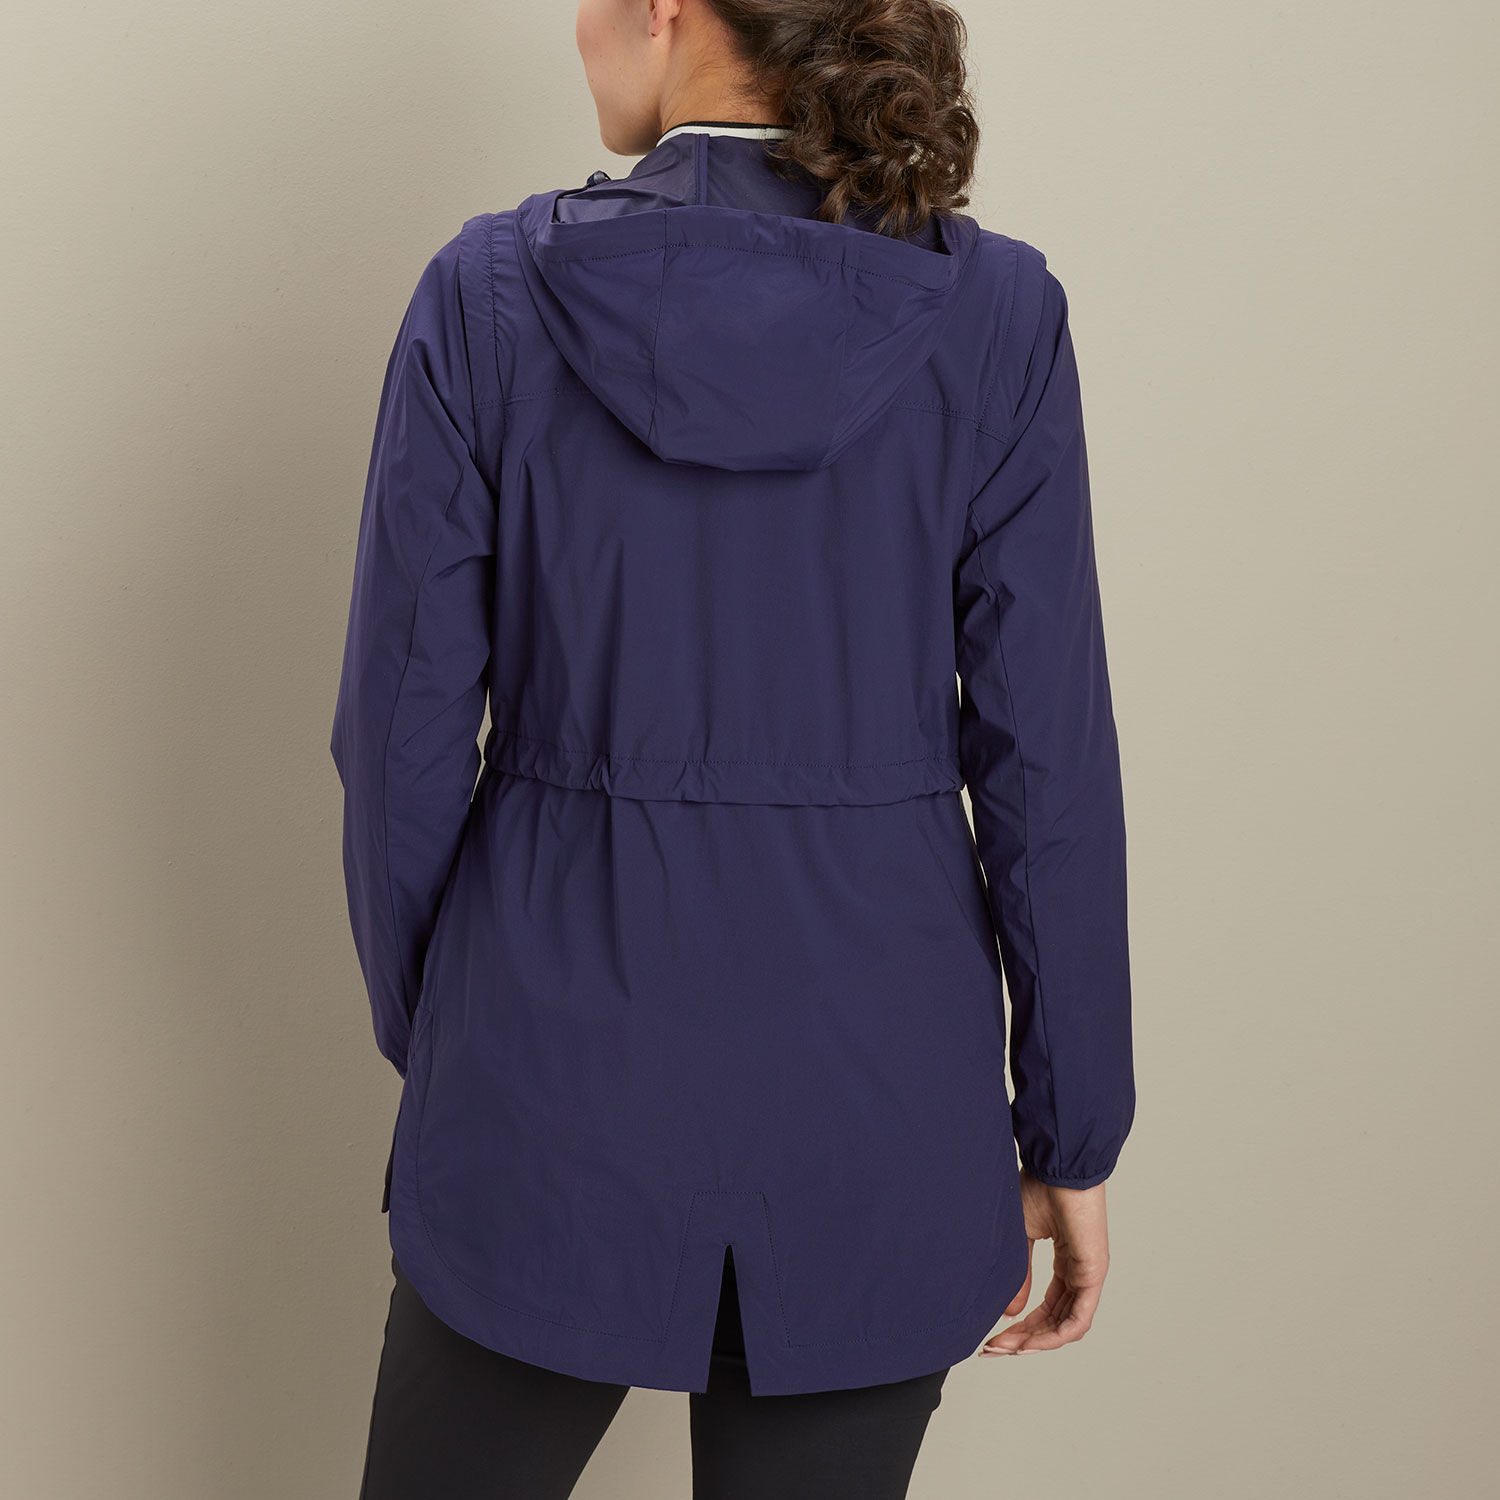 Women's Nonstop Convertible Utility Jacket | Duluth Trading Company